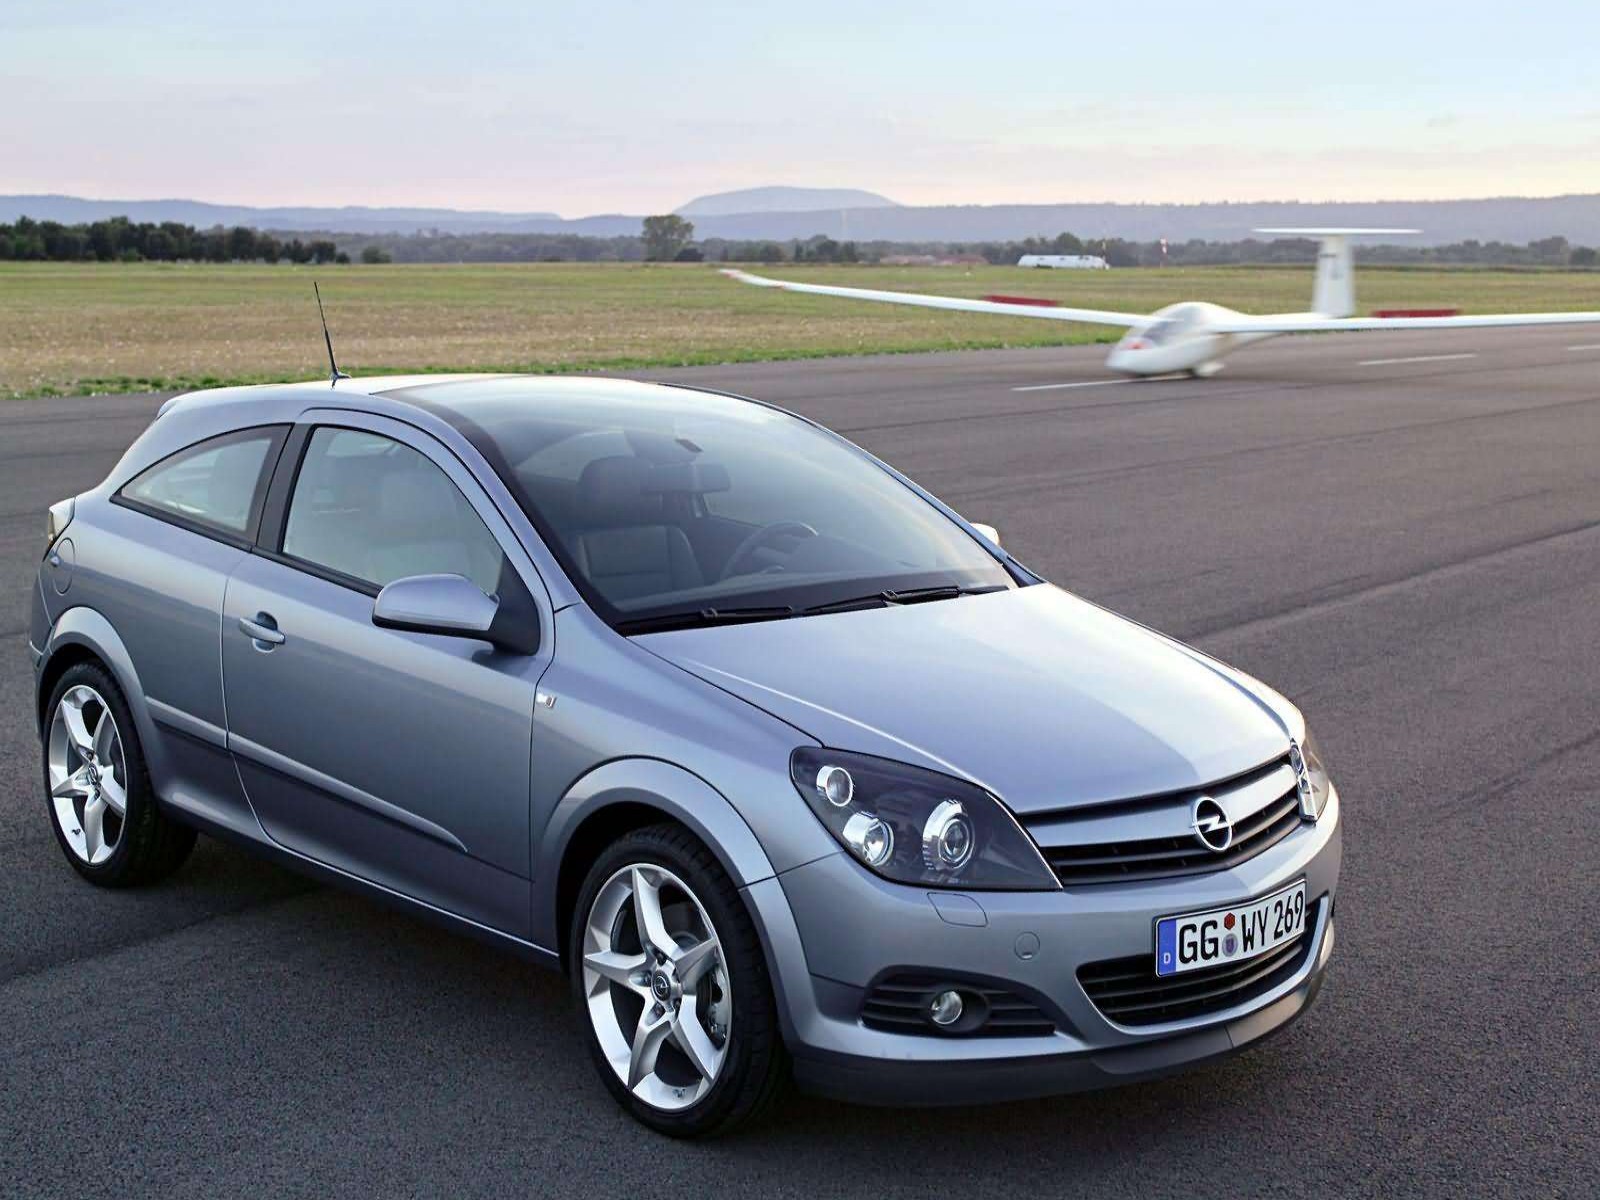 Car Pictures: Opel Astra GTC with Panoramic Roof 2005